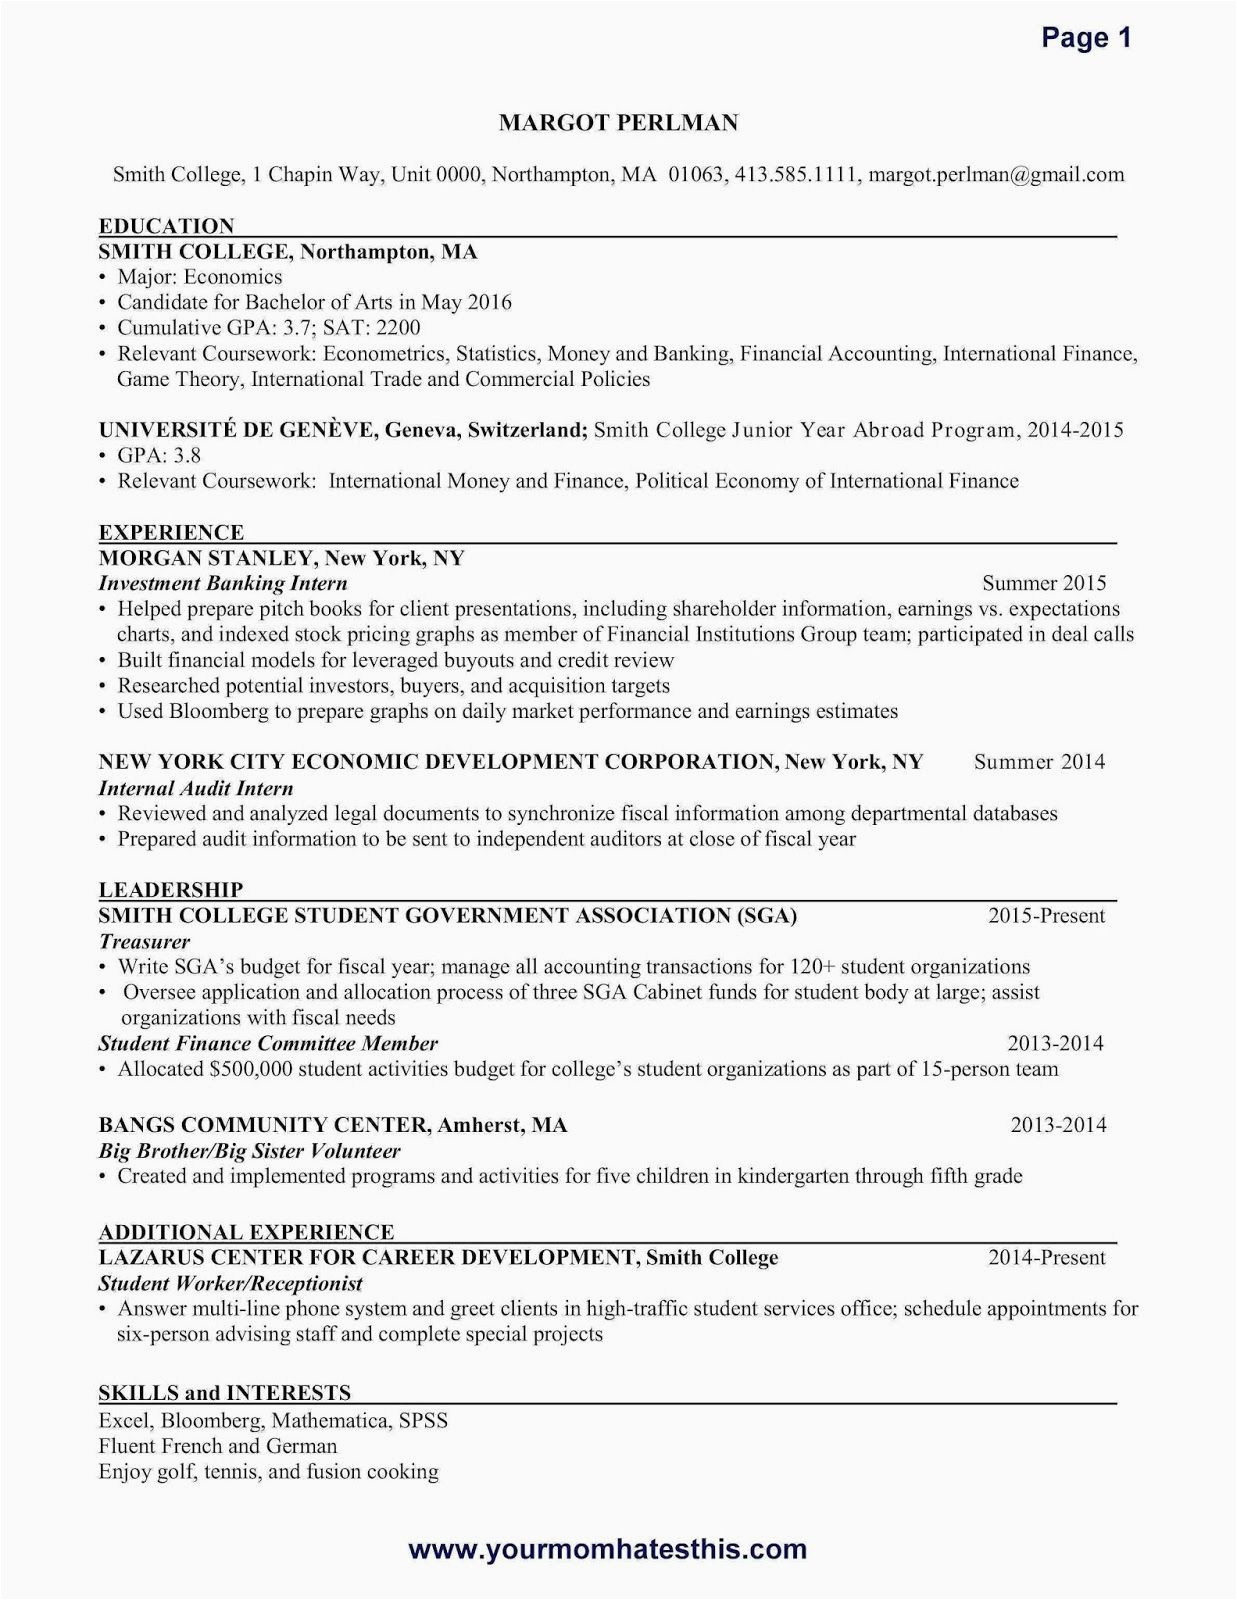 Sample Resume for Accounting Clerk with No Experience Account Clerk Resume Account Clerk Resume Sample Account